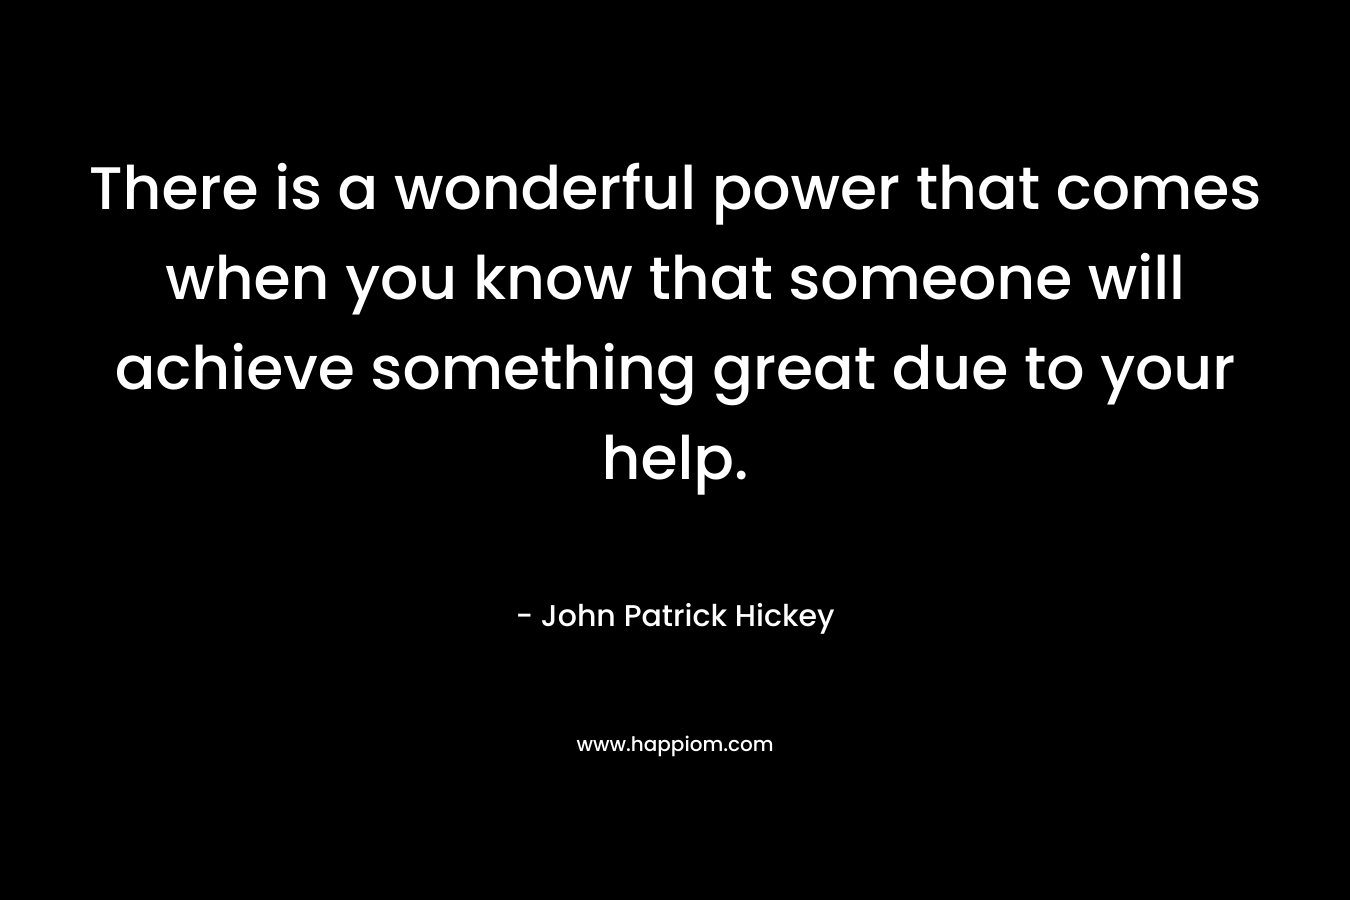 There is a wonderful power that comes when you know that someone will achieve something great due to your help.